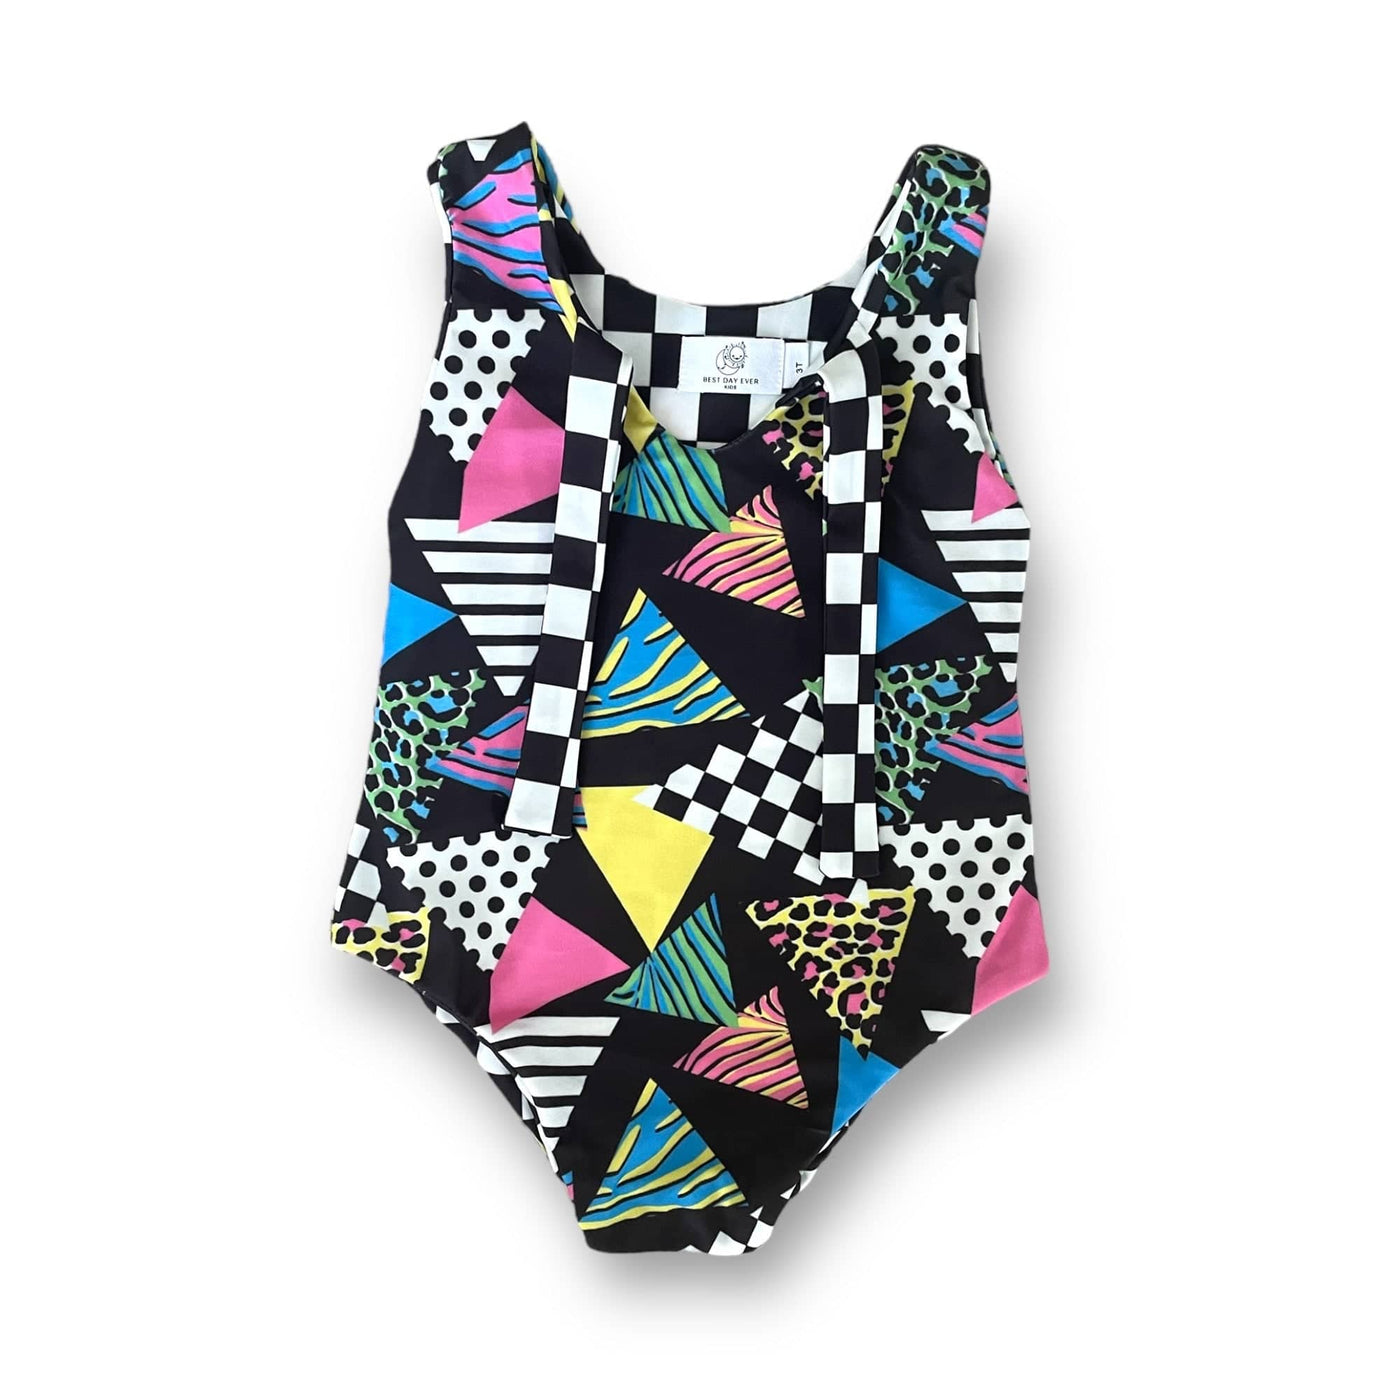 Best Day Ever Kids Swimsuit Totally Rad Contrast Swimsuit buy online boutique kids clothing